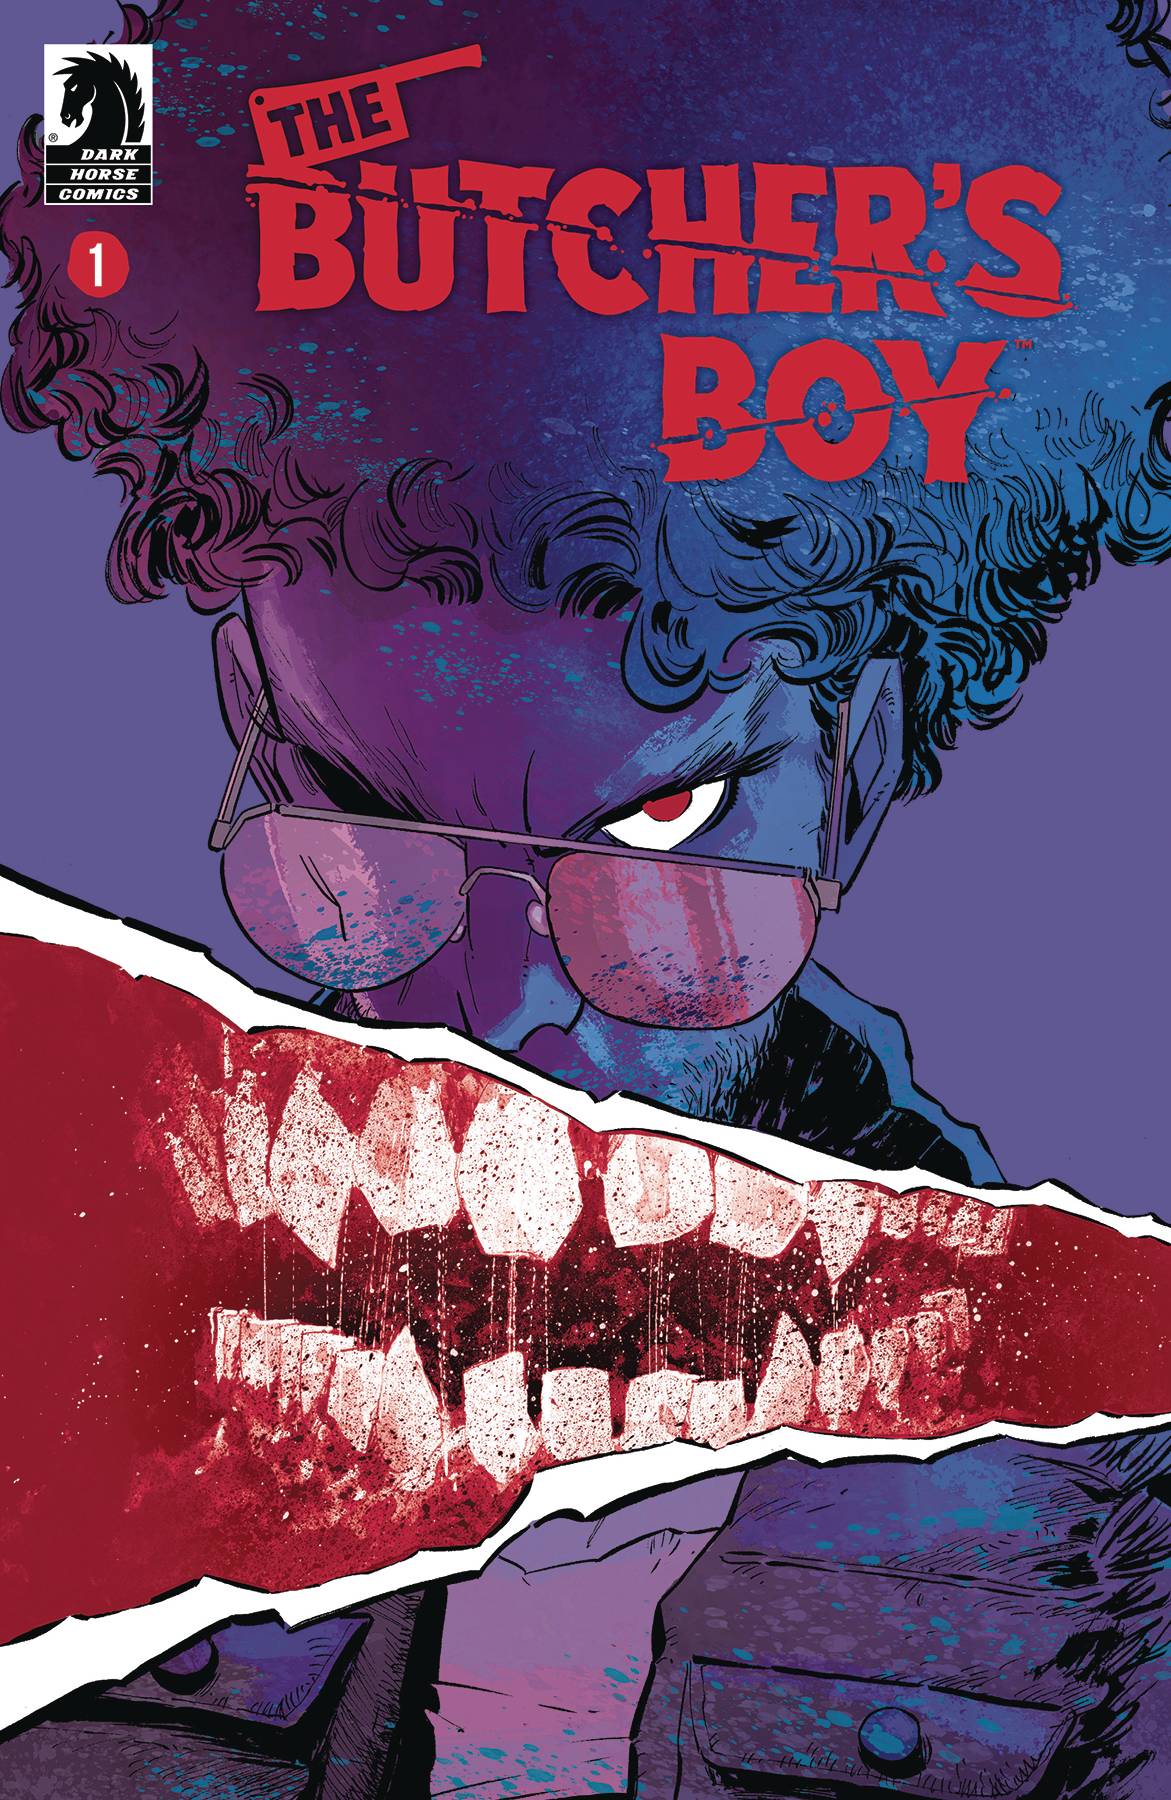 The Butcher's Boy #1 (Cover A) (Justin Greenwood)